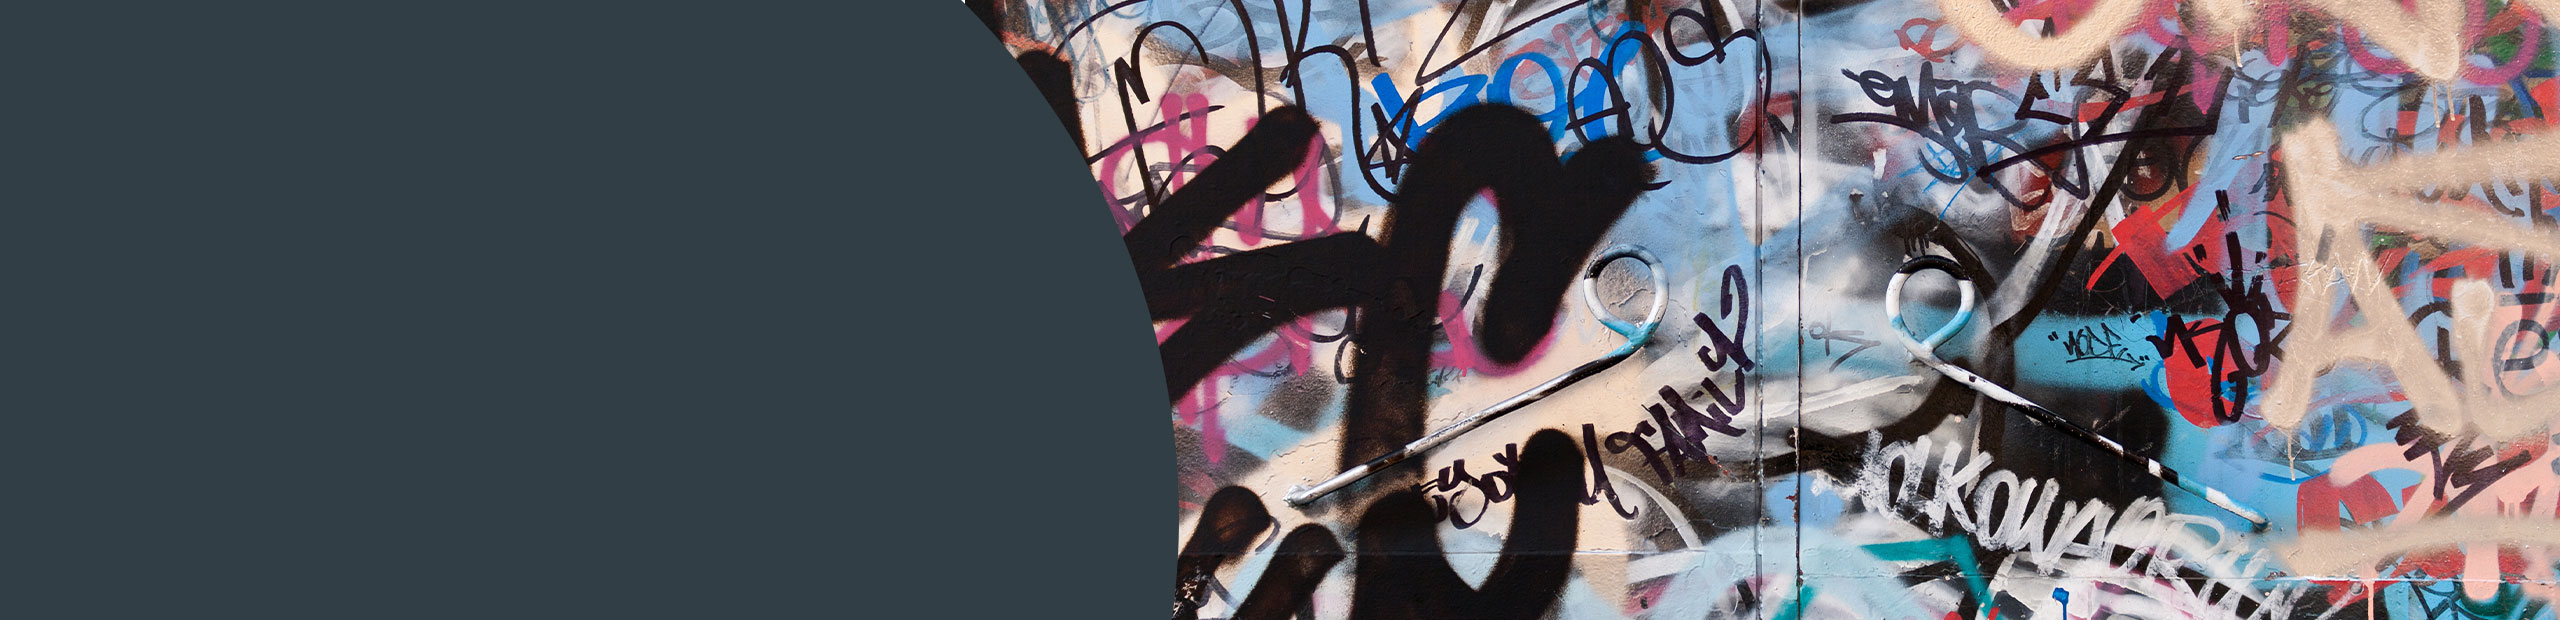 Graffiti Removal Services - Enfield